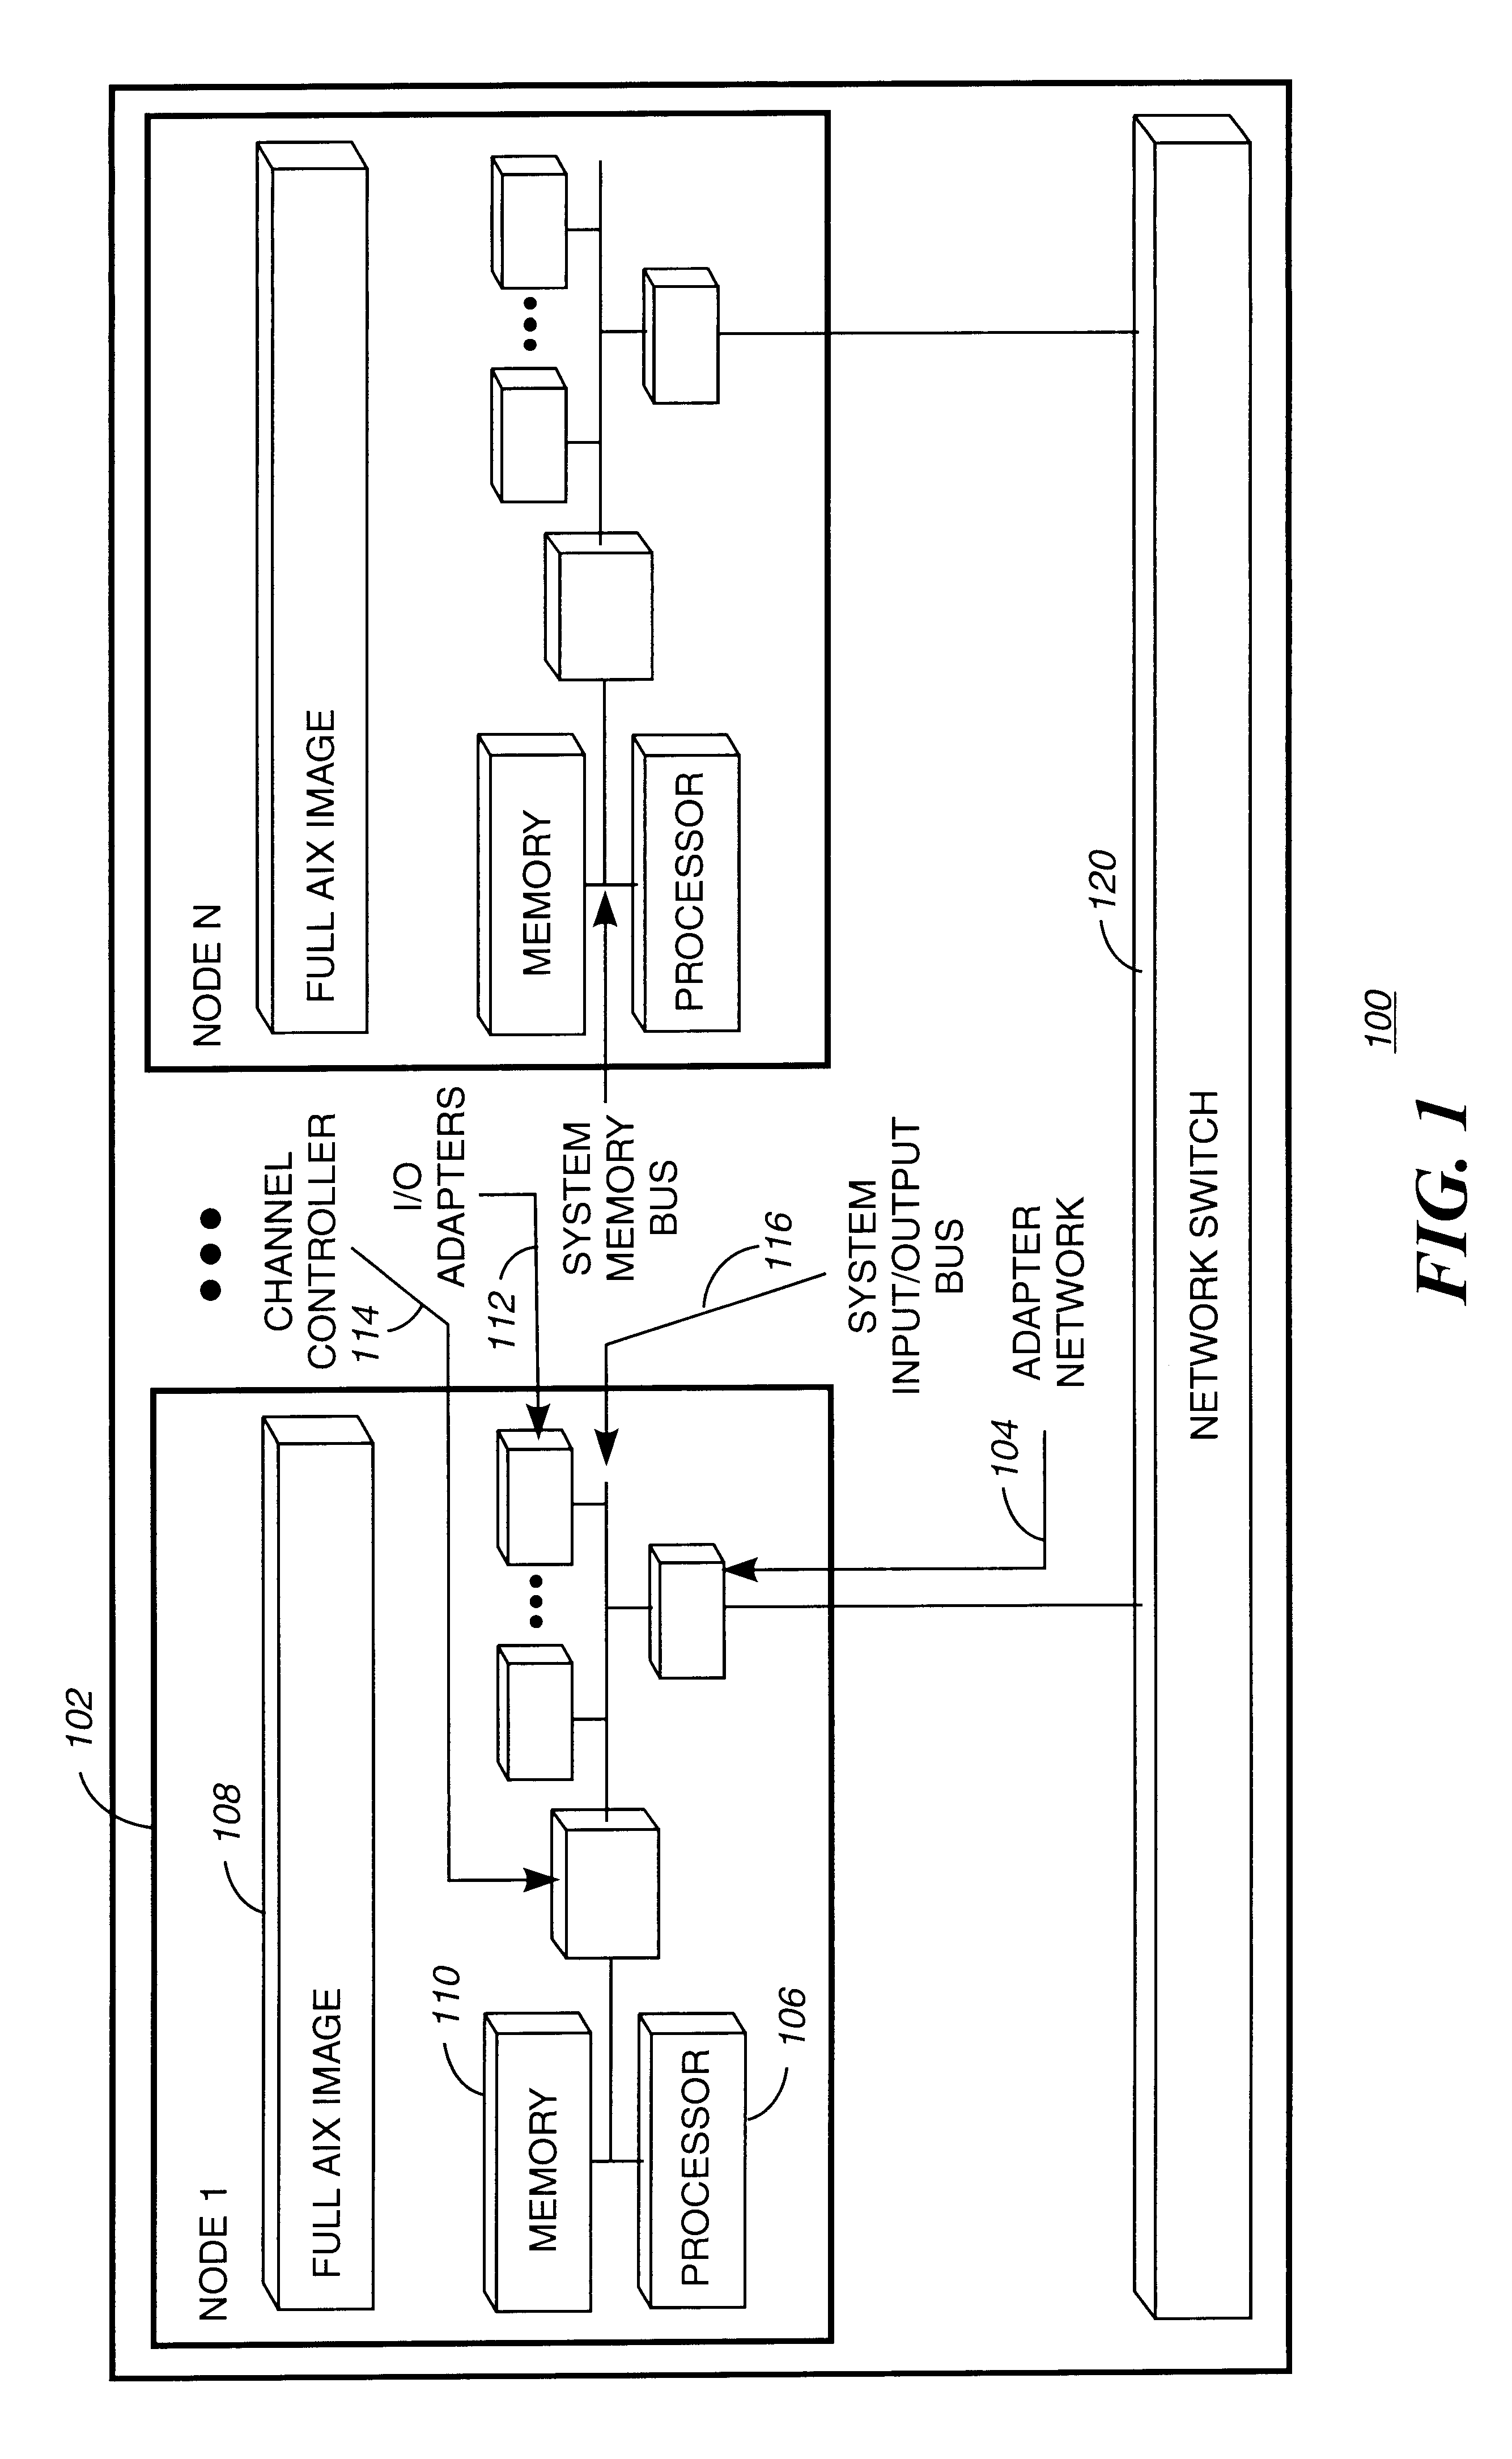 Method and apparatus for monitoring the availability of nodes in a communications network